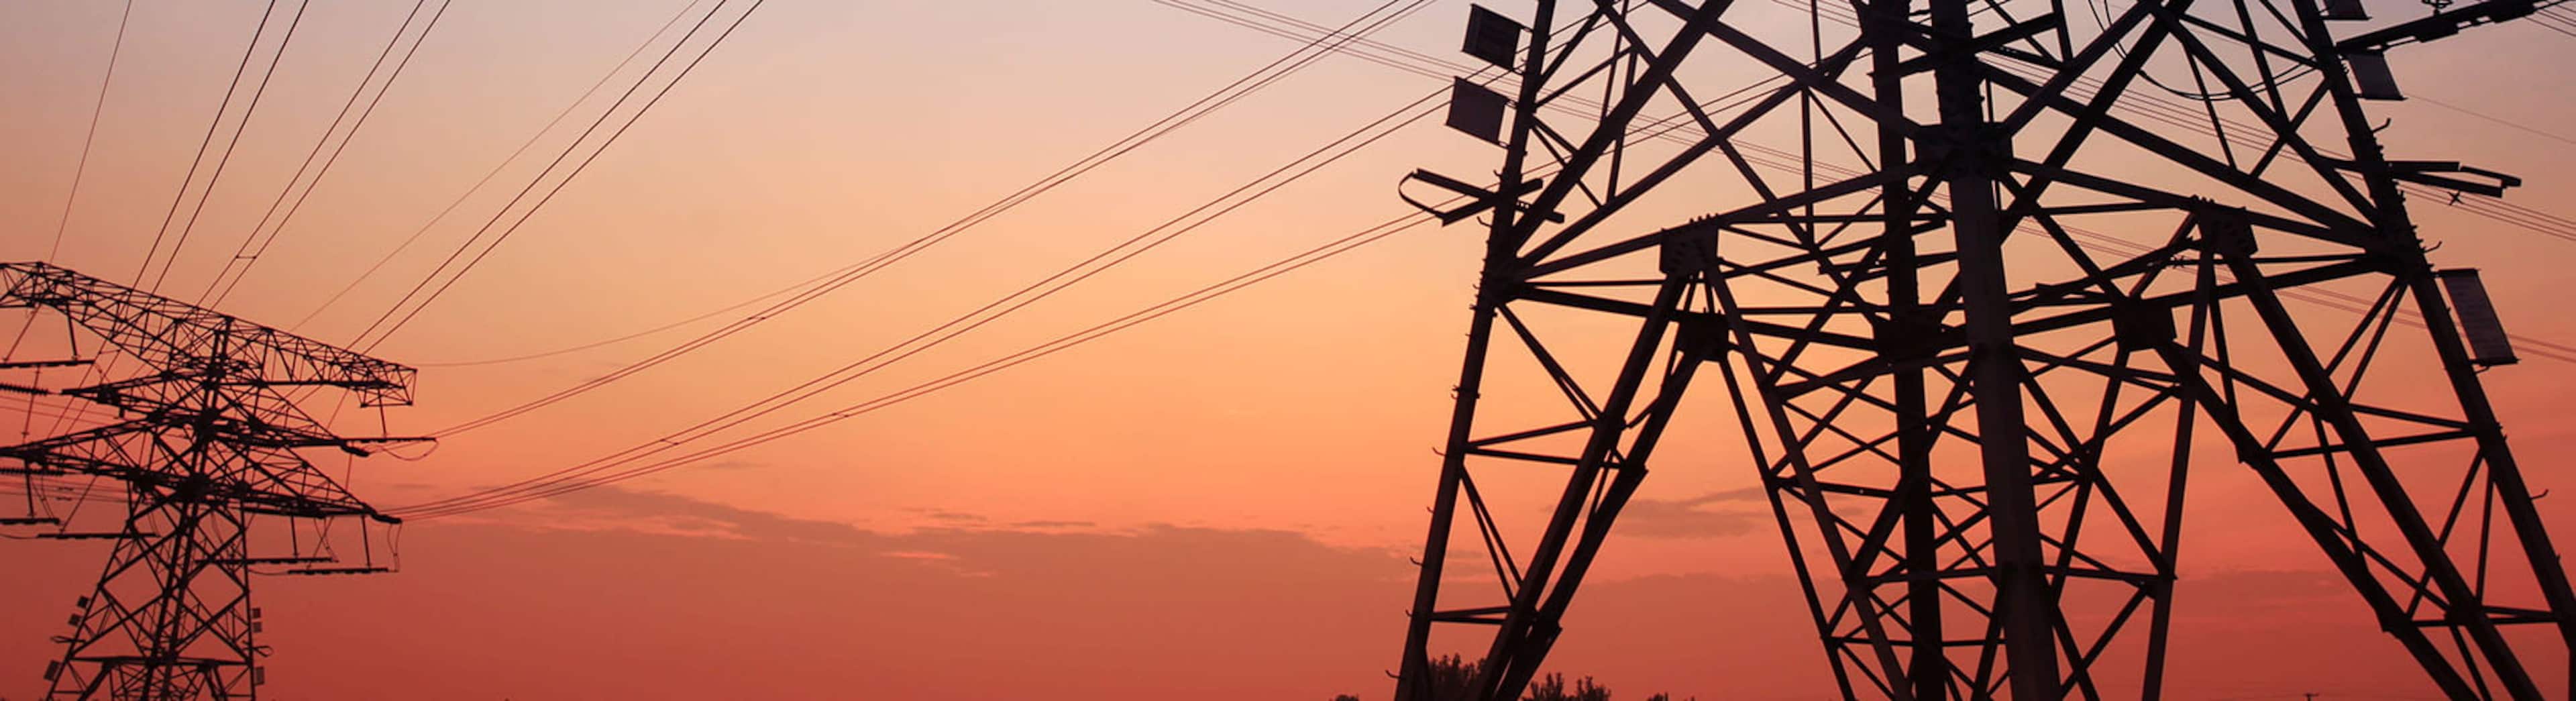 High_Voltage_Towers_At_Sunset_S_2305